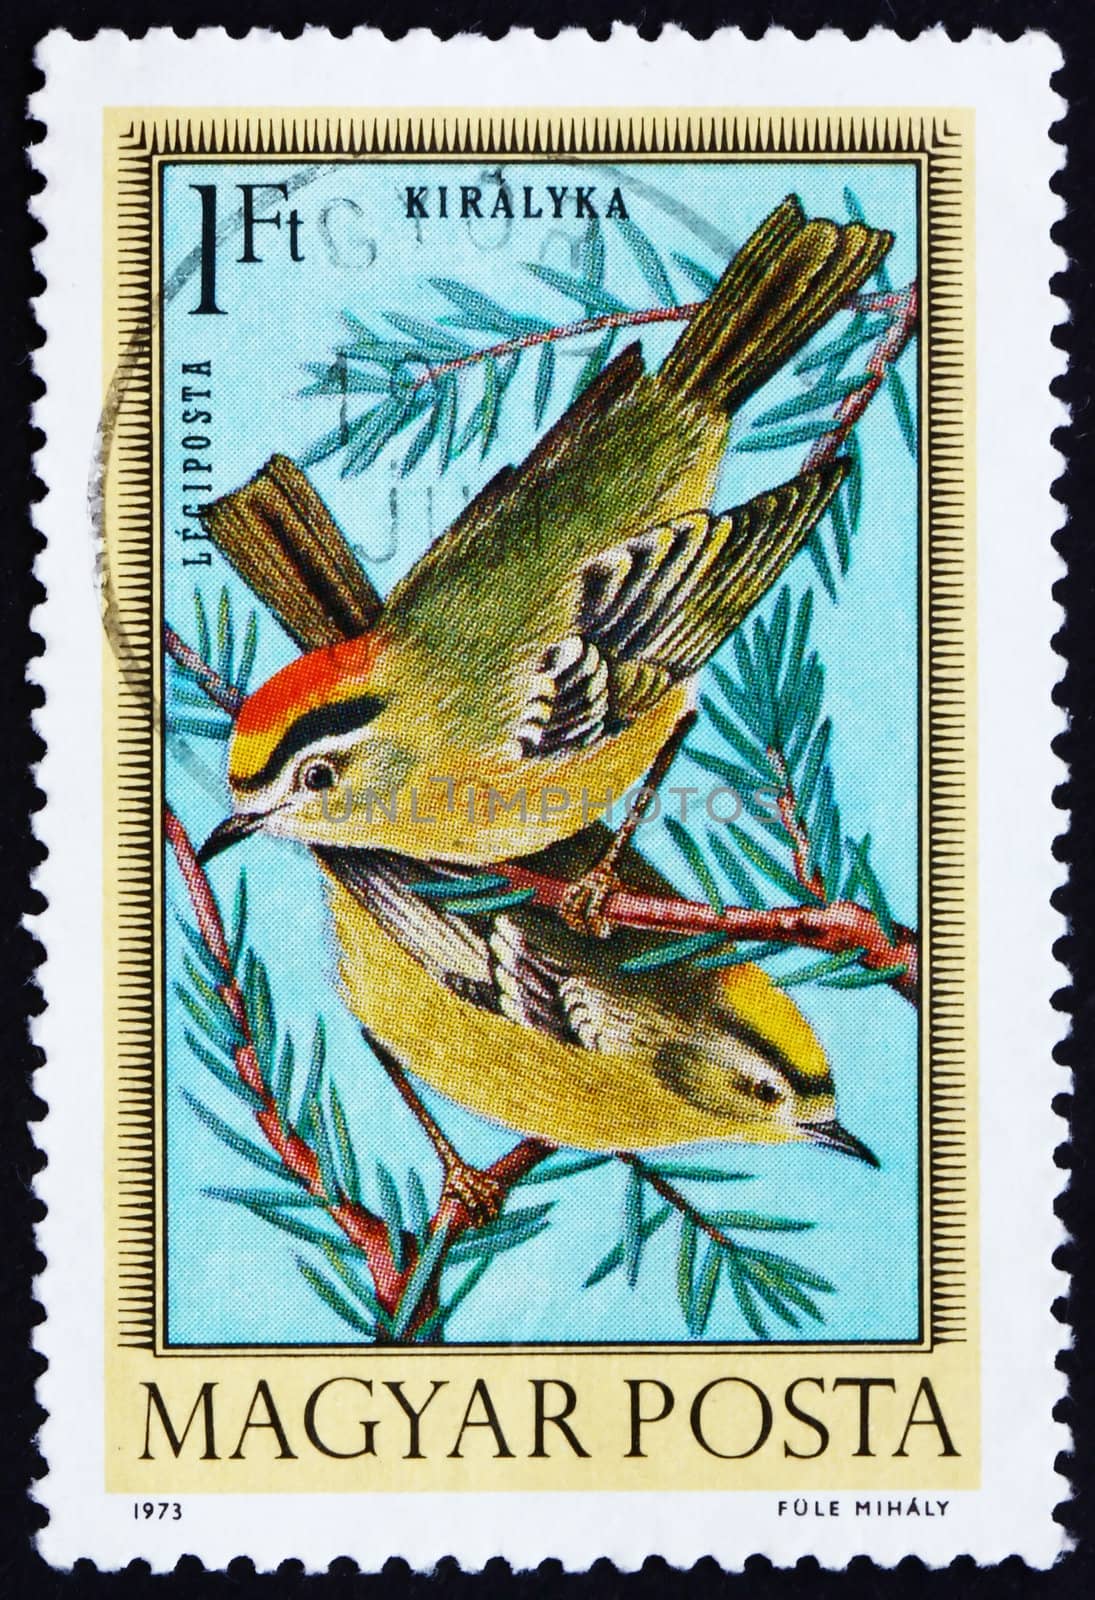 HUNGARY - CIRCA 1921: a stamp printed in the Hungary shows Firecrests, Birds, circa 1921